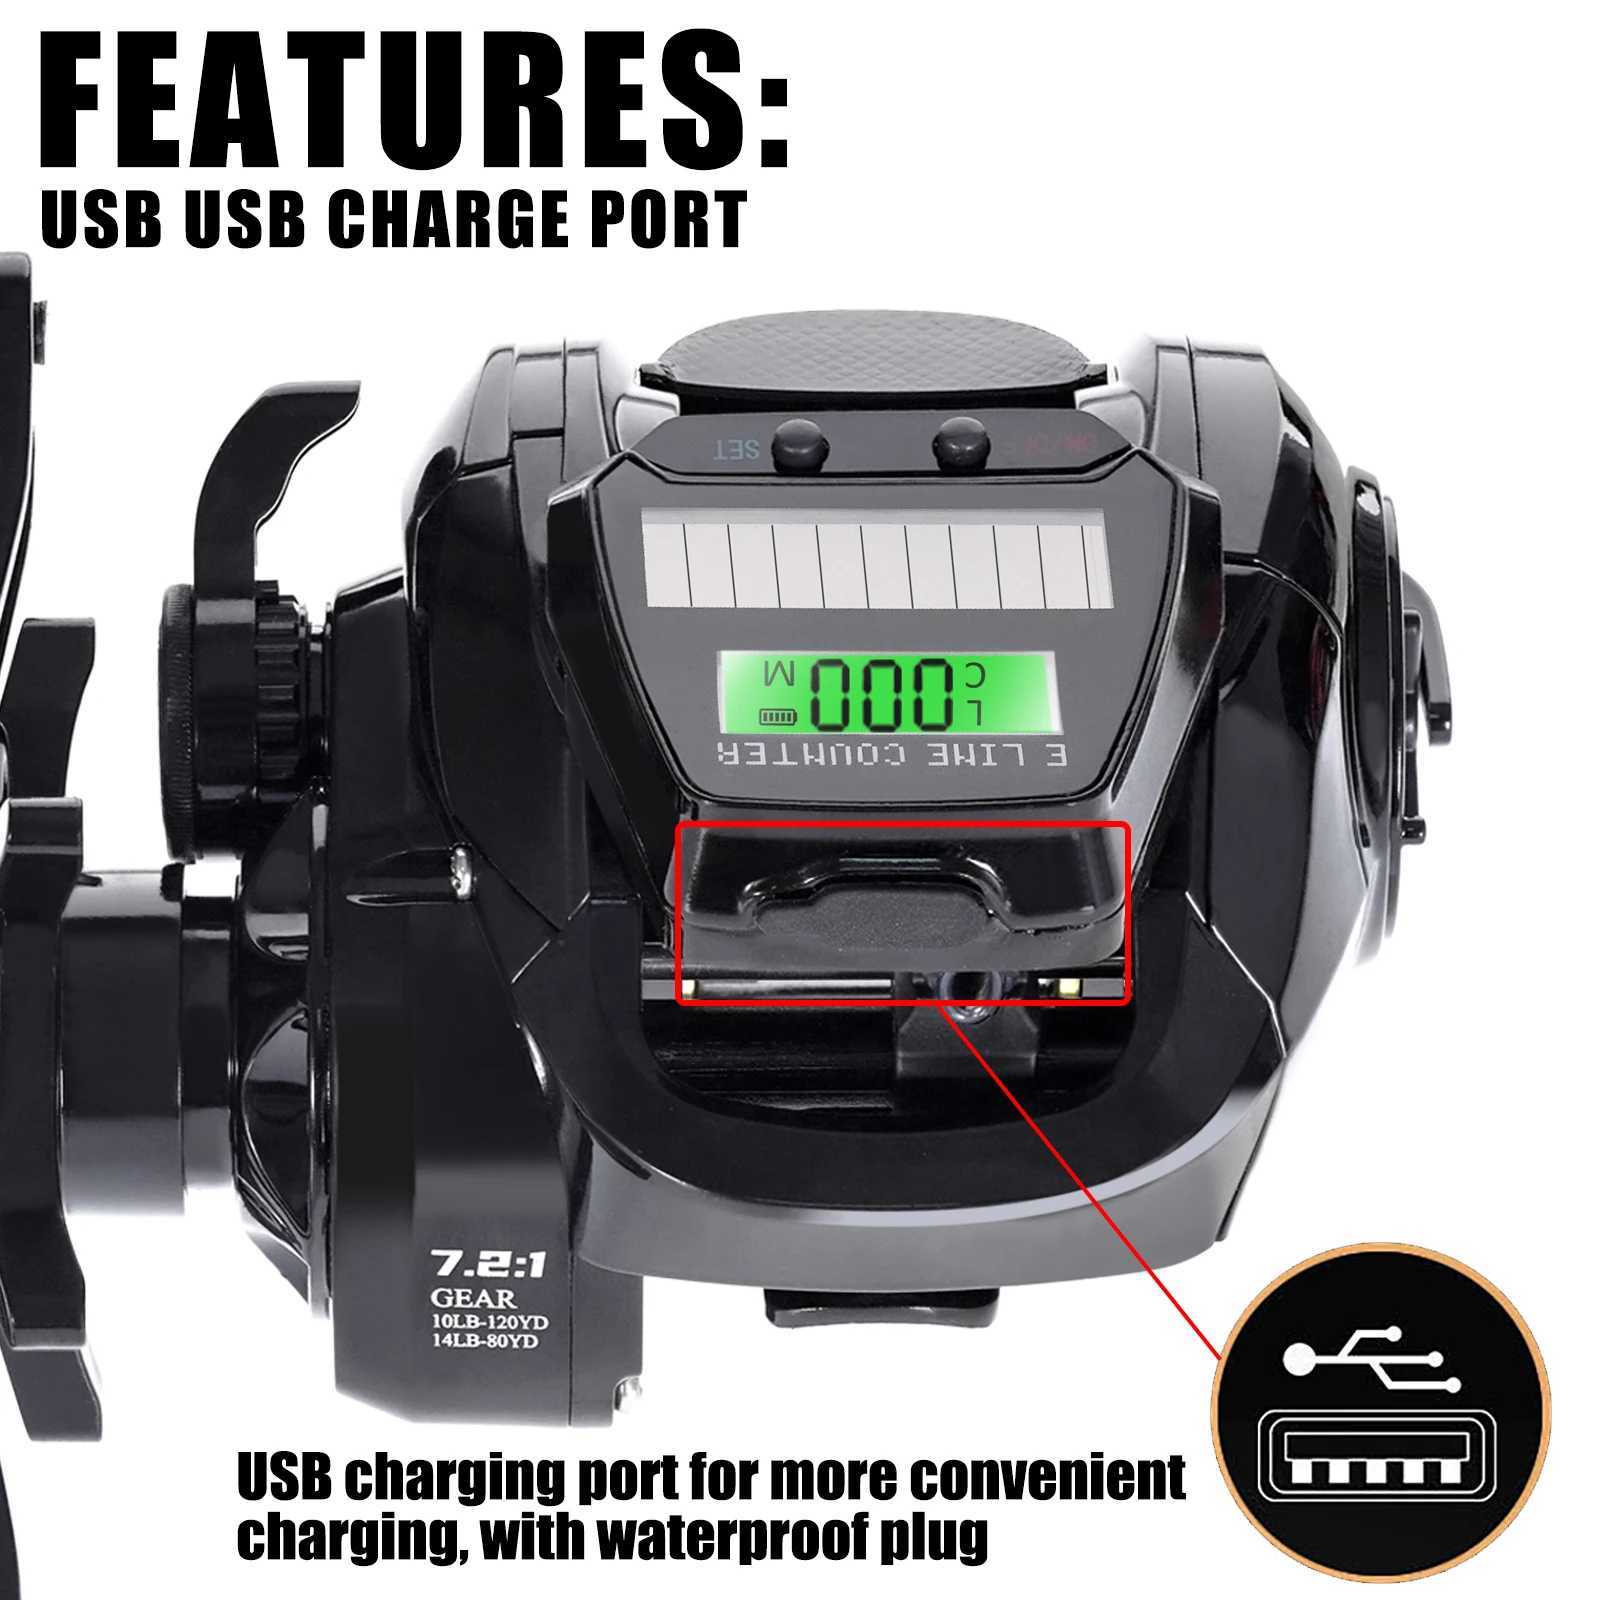 Boat Fishing Rods New Electronic Baitcasting Fishing Reel Led Screen USB And Solar Charging 7.2 1 Sea Saltwater Waterproof Cast Drum Wheel Casting YQ240301